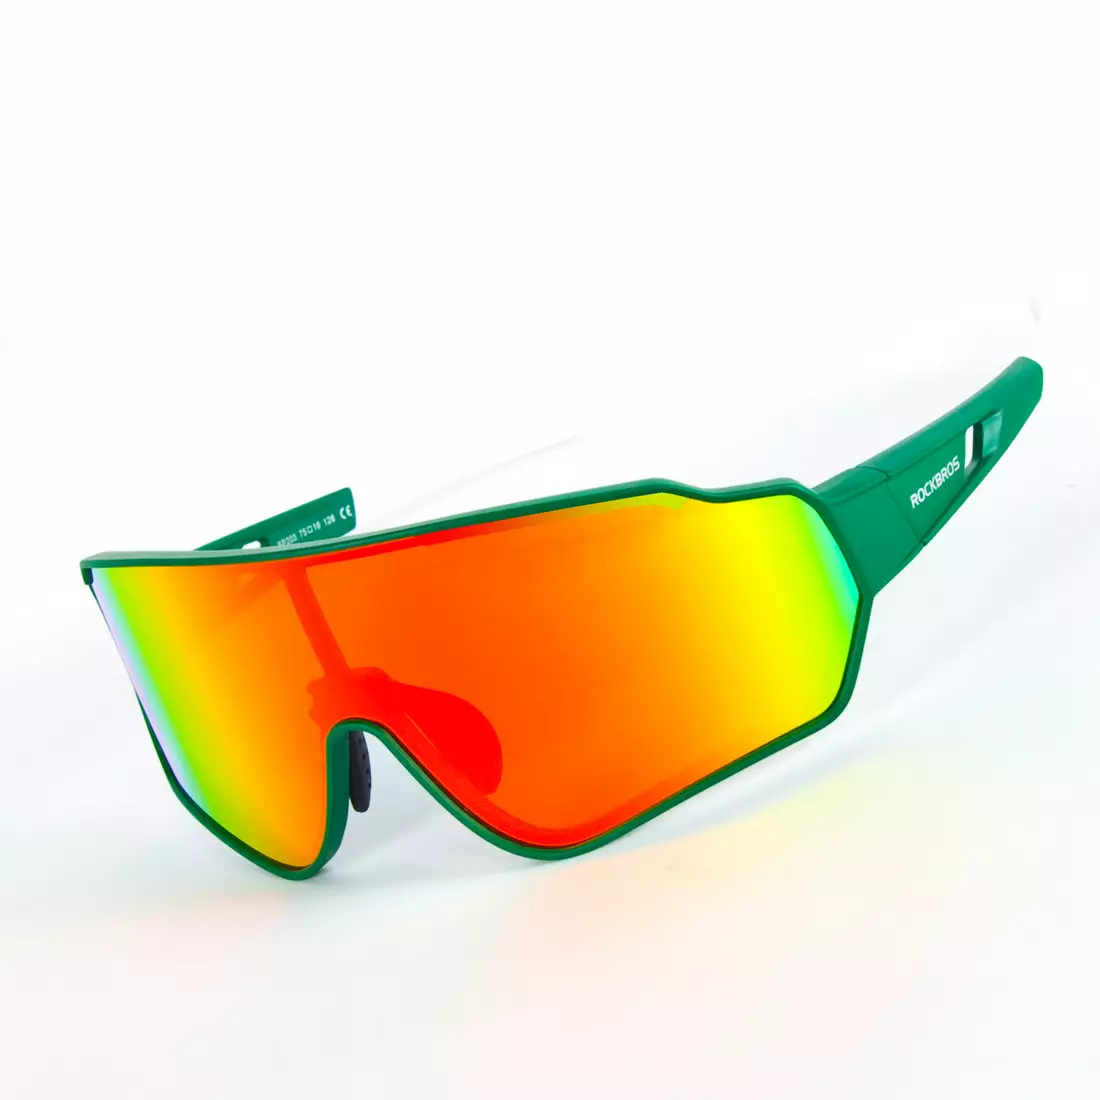 Rockbros 10165 bicycle sports glasses with polarized green-white